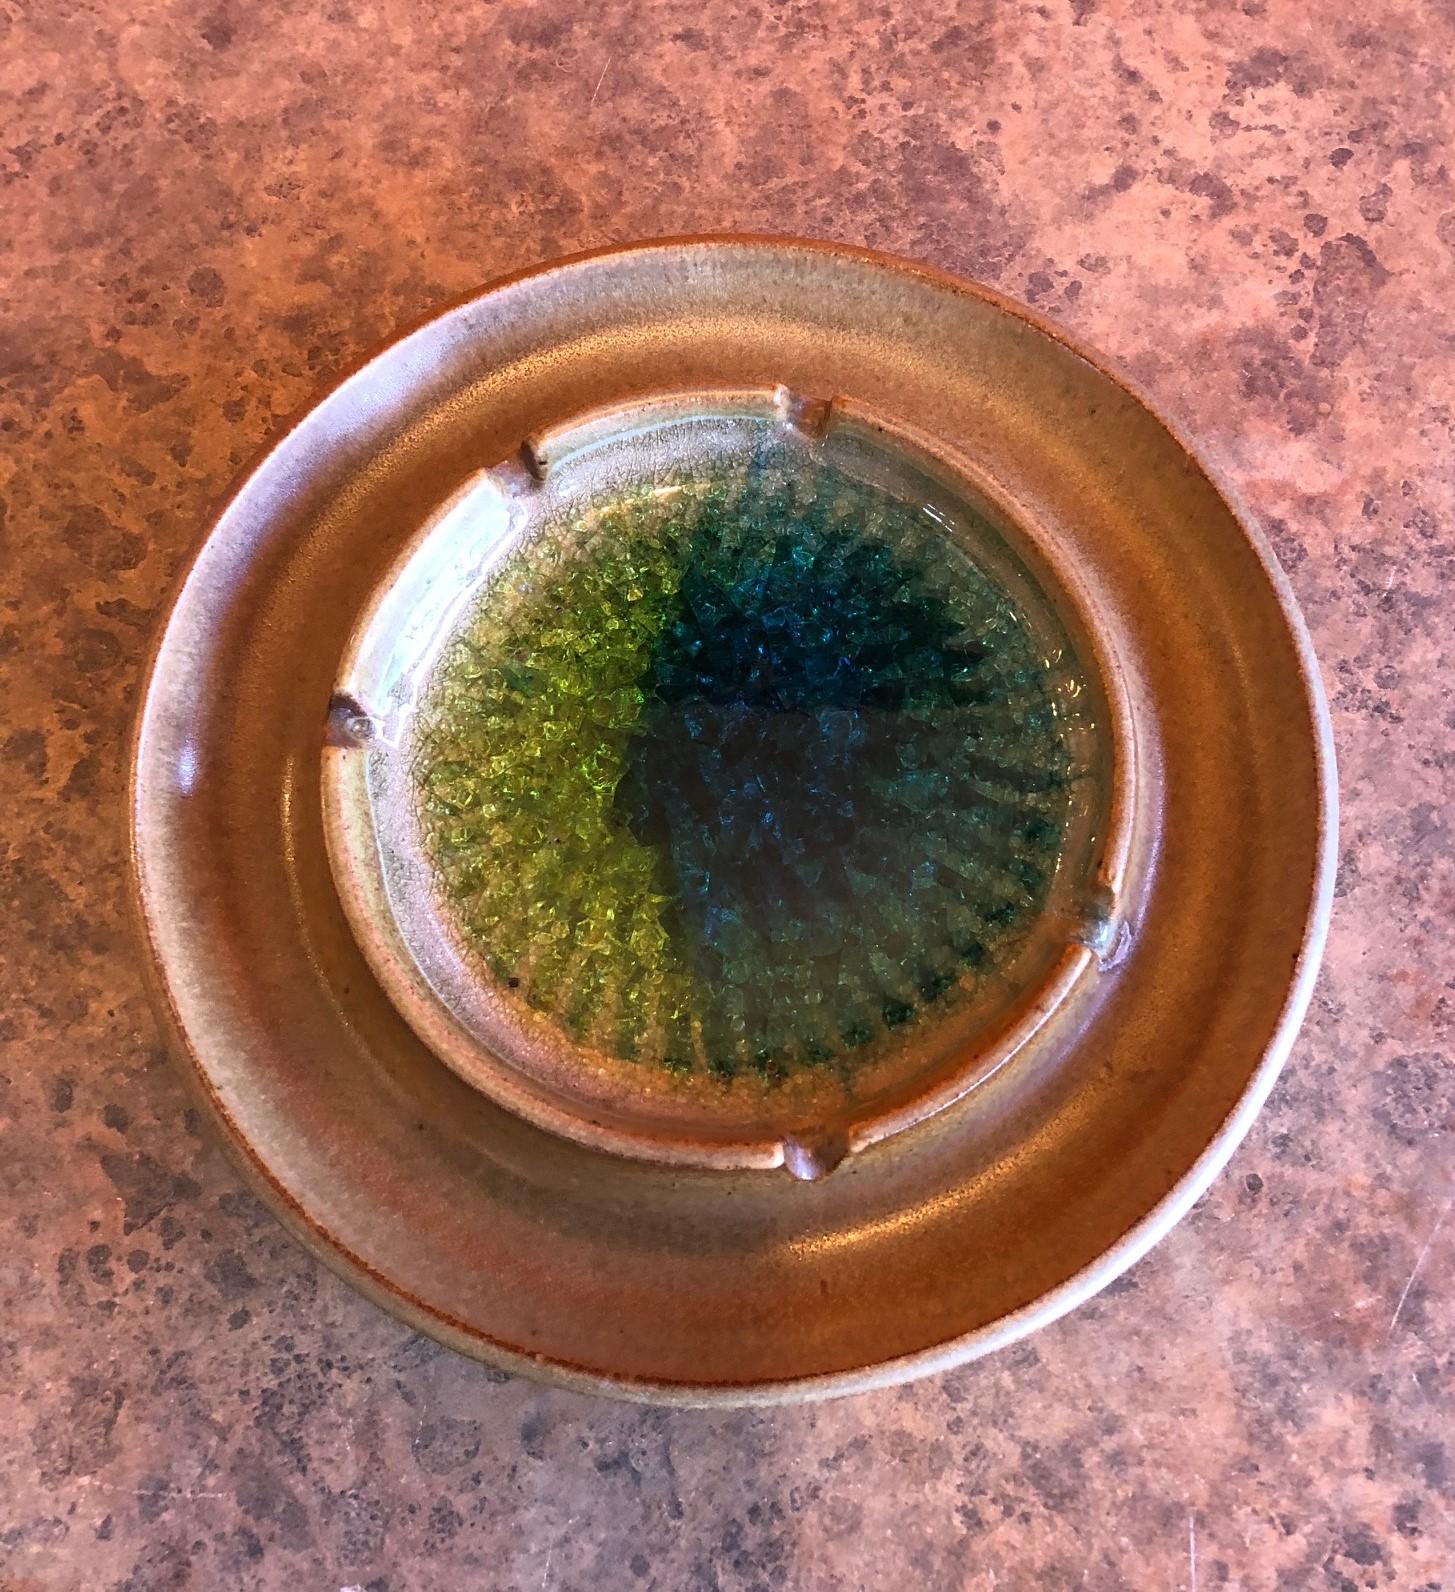 A wonderful earthenware ashtray with green, yellow and blue Blenko crackled glass in the center signed by Robert Maxwell, circa 1960s. The piece measures 8